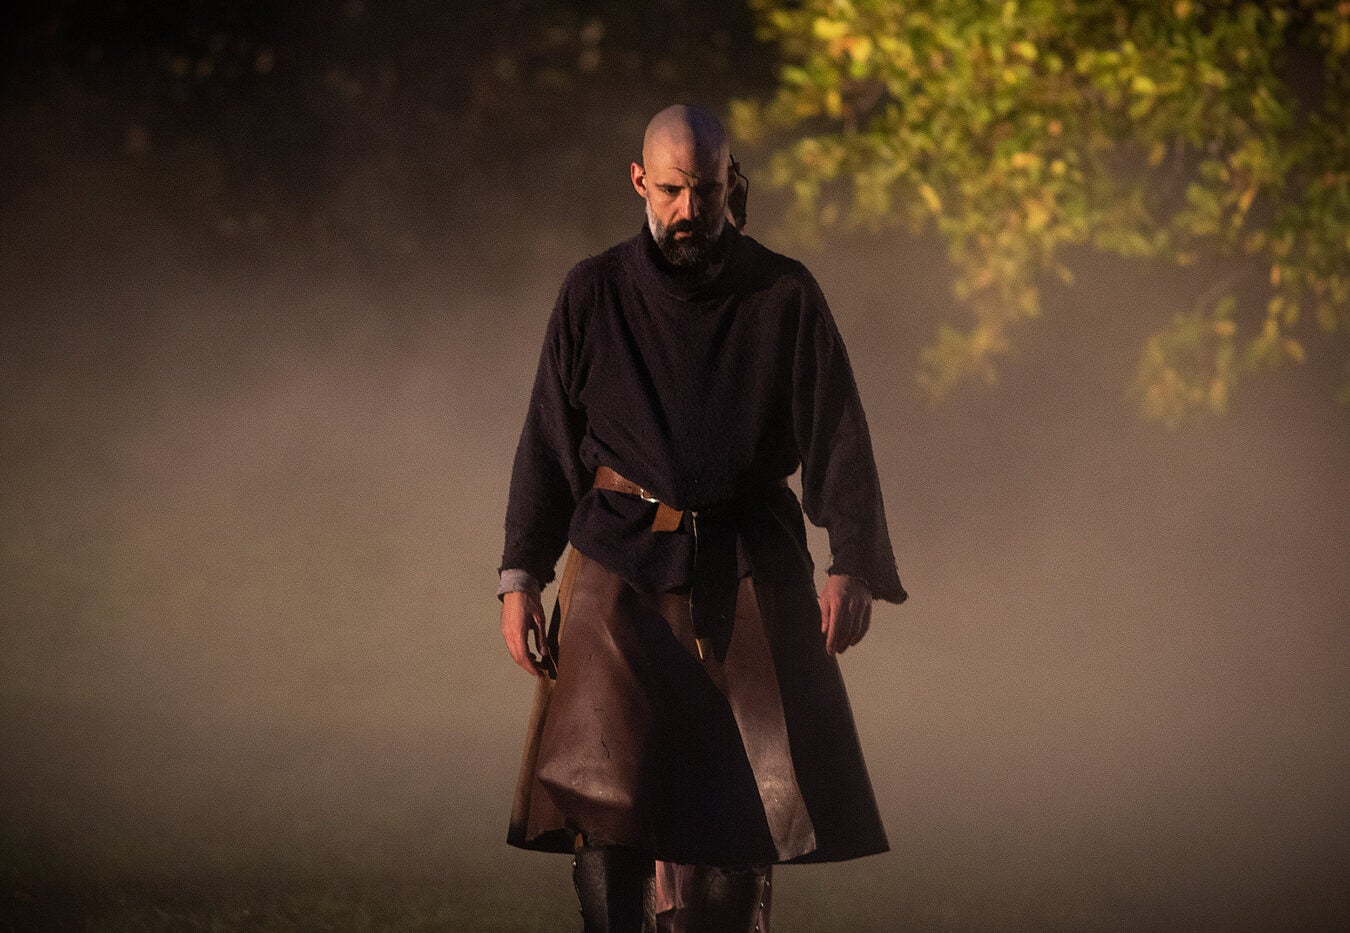 Macbeth (played by Nael Nacer).